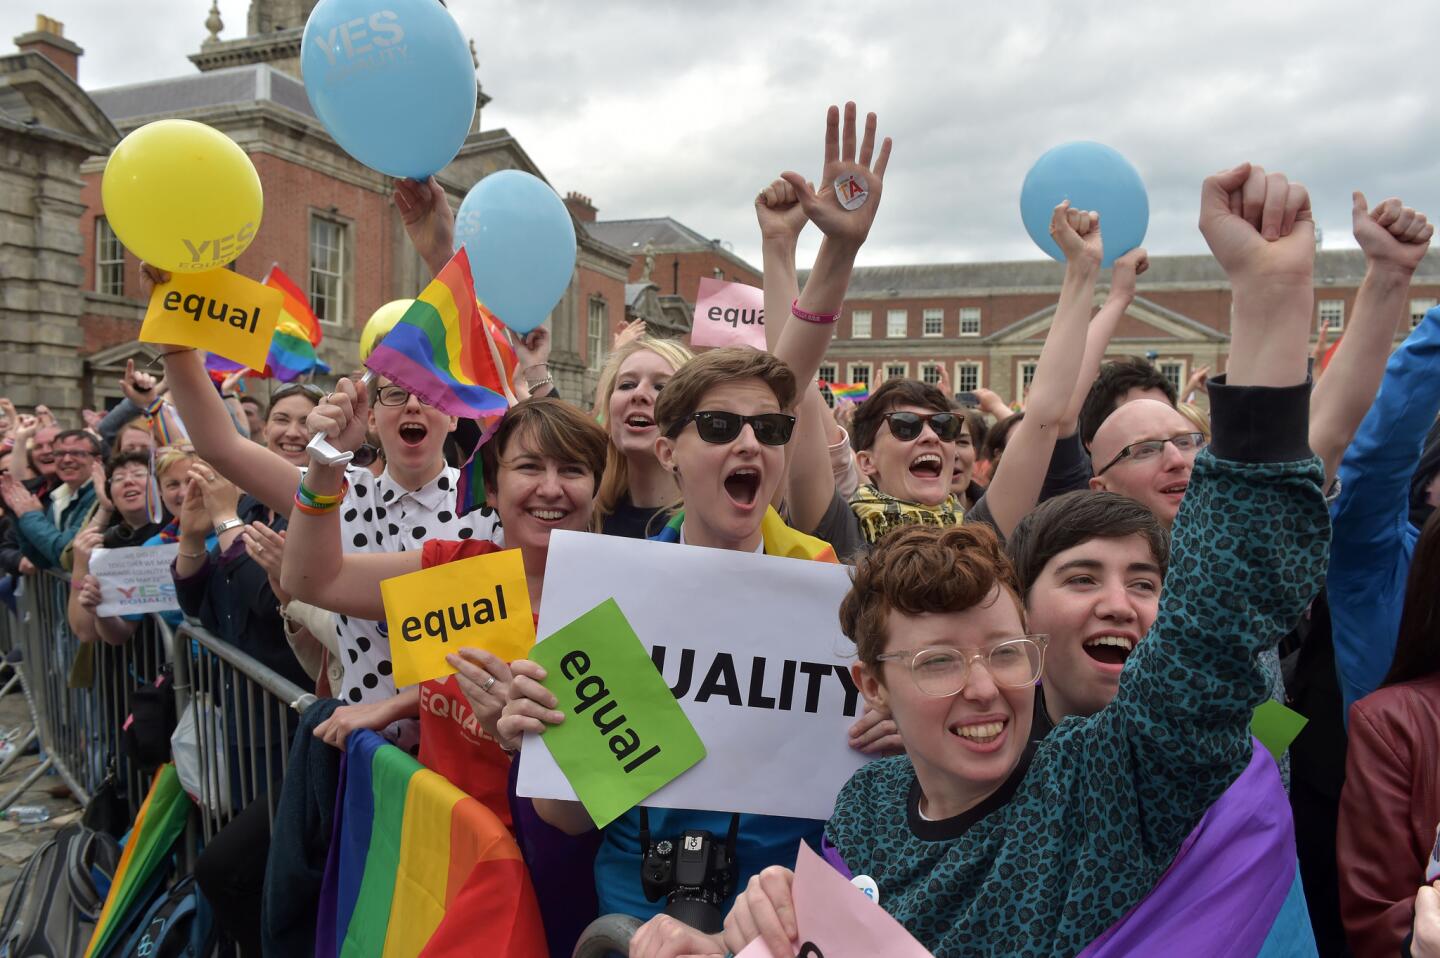 The crowd at Dublin Castle Square cheers as the result of the same-sex marriage referendum is relayed. Ireland voted in favor.